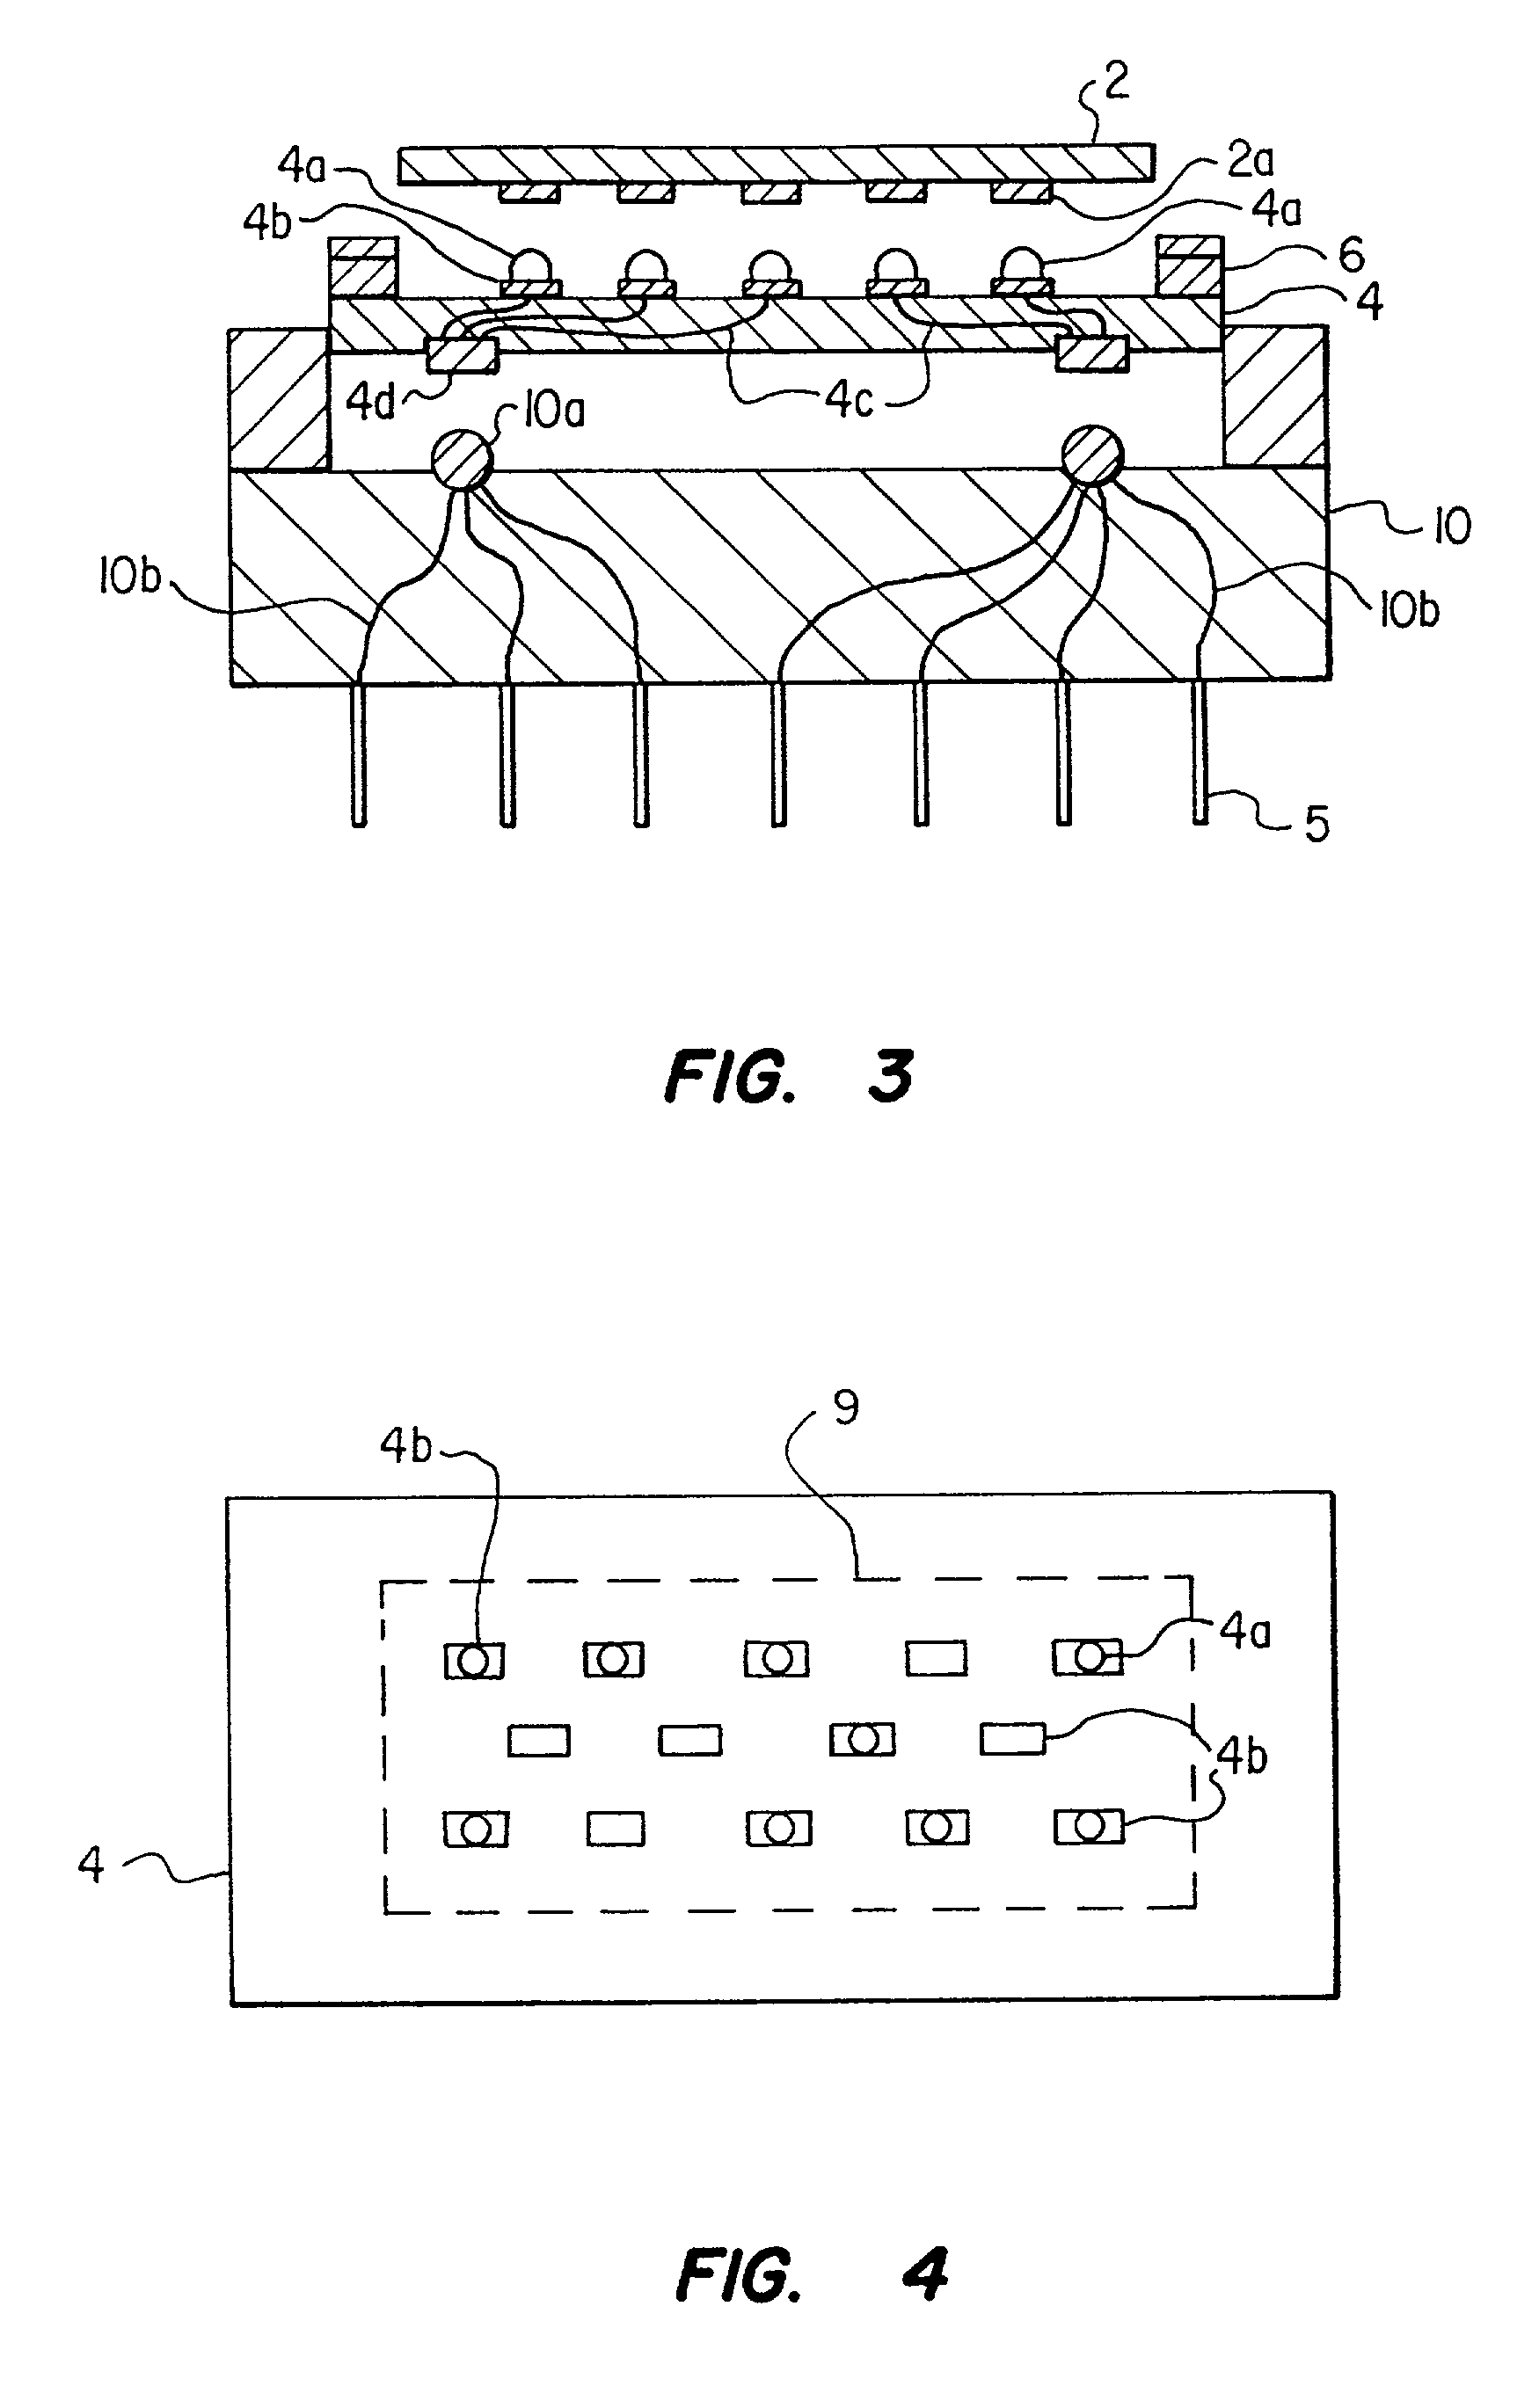 Method for forming conductive bumps for the purpose of contrructing a fine pitch test device